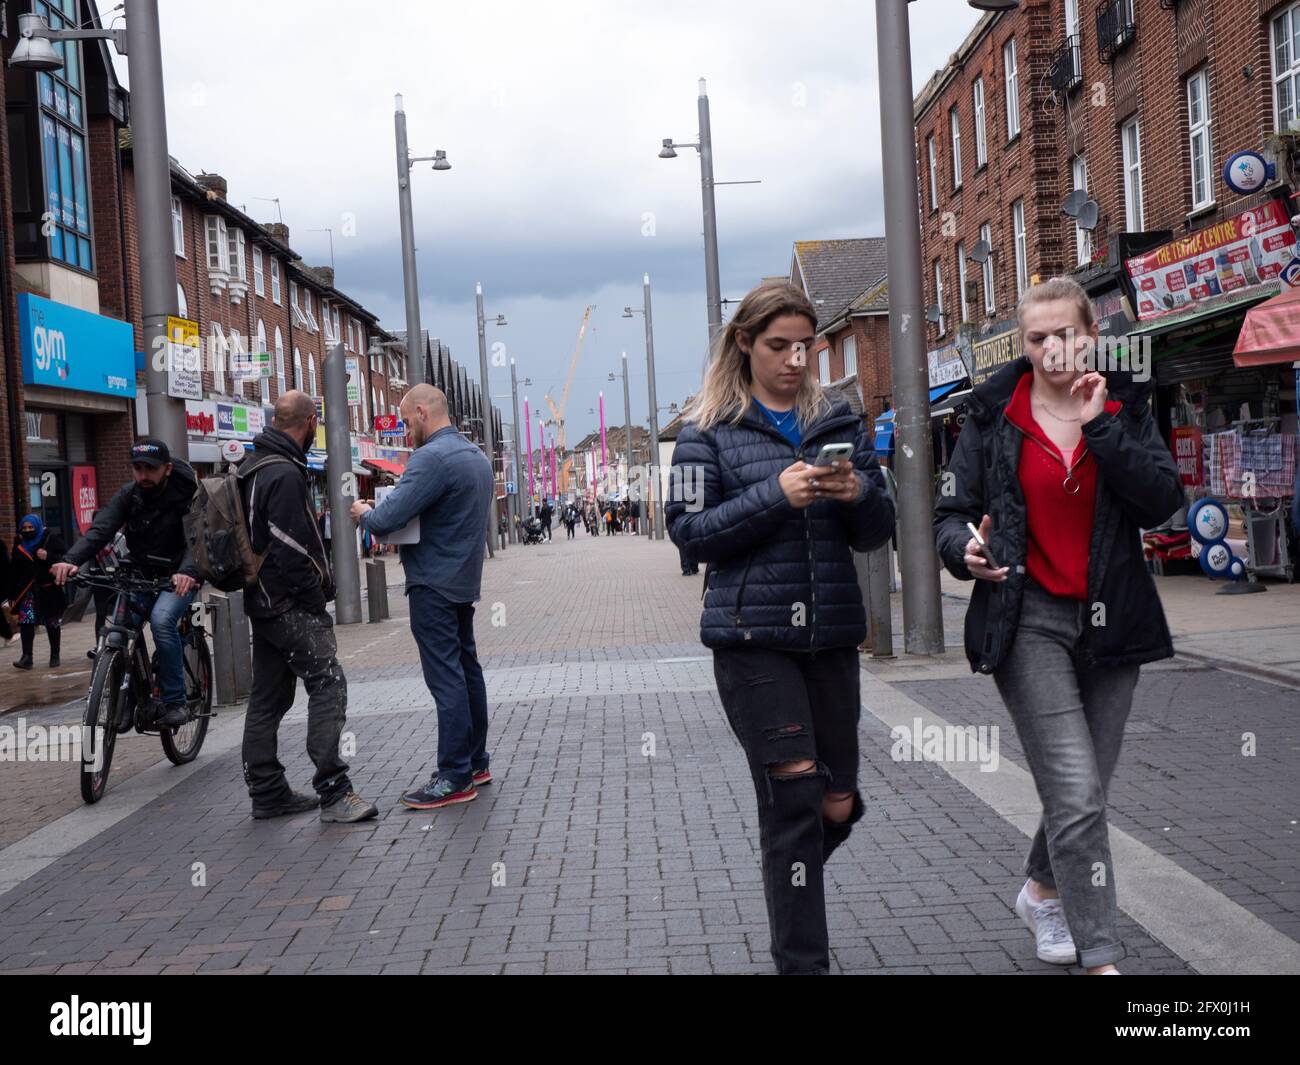 Shoppers in Walthamstow High Street, London Stock Photo